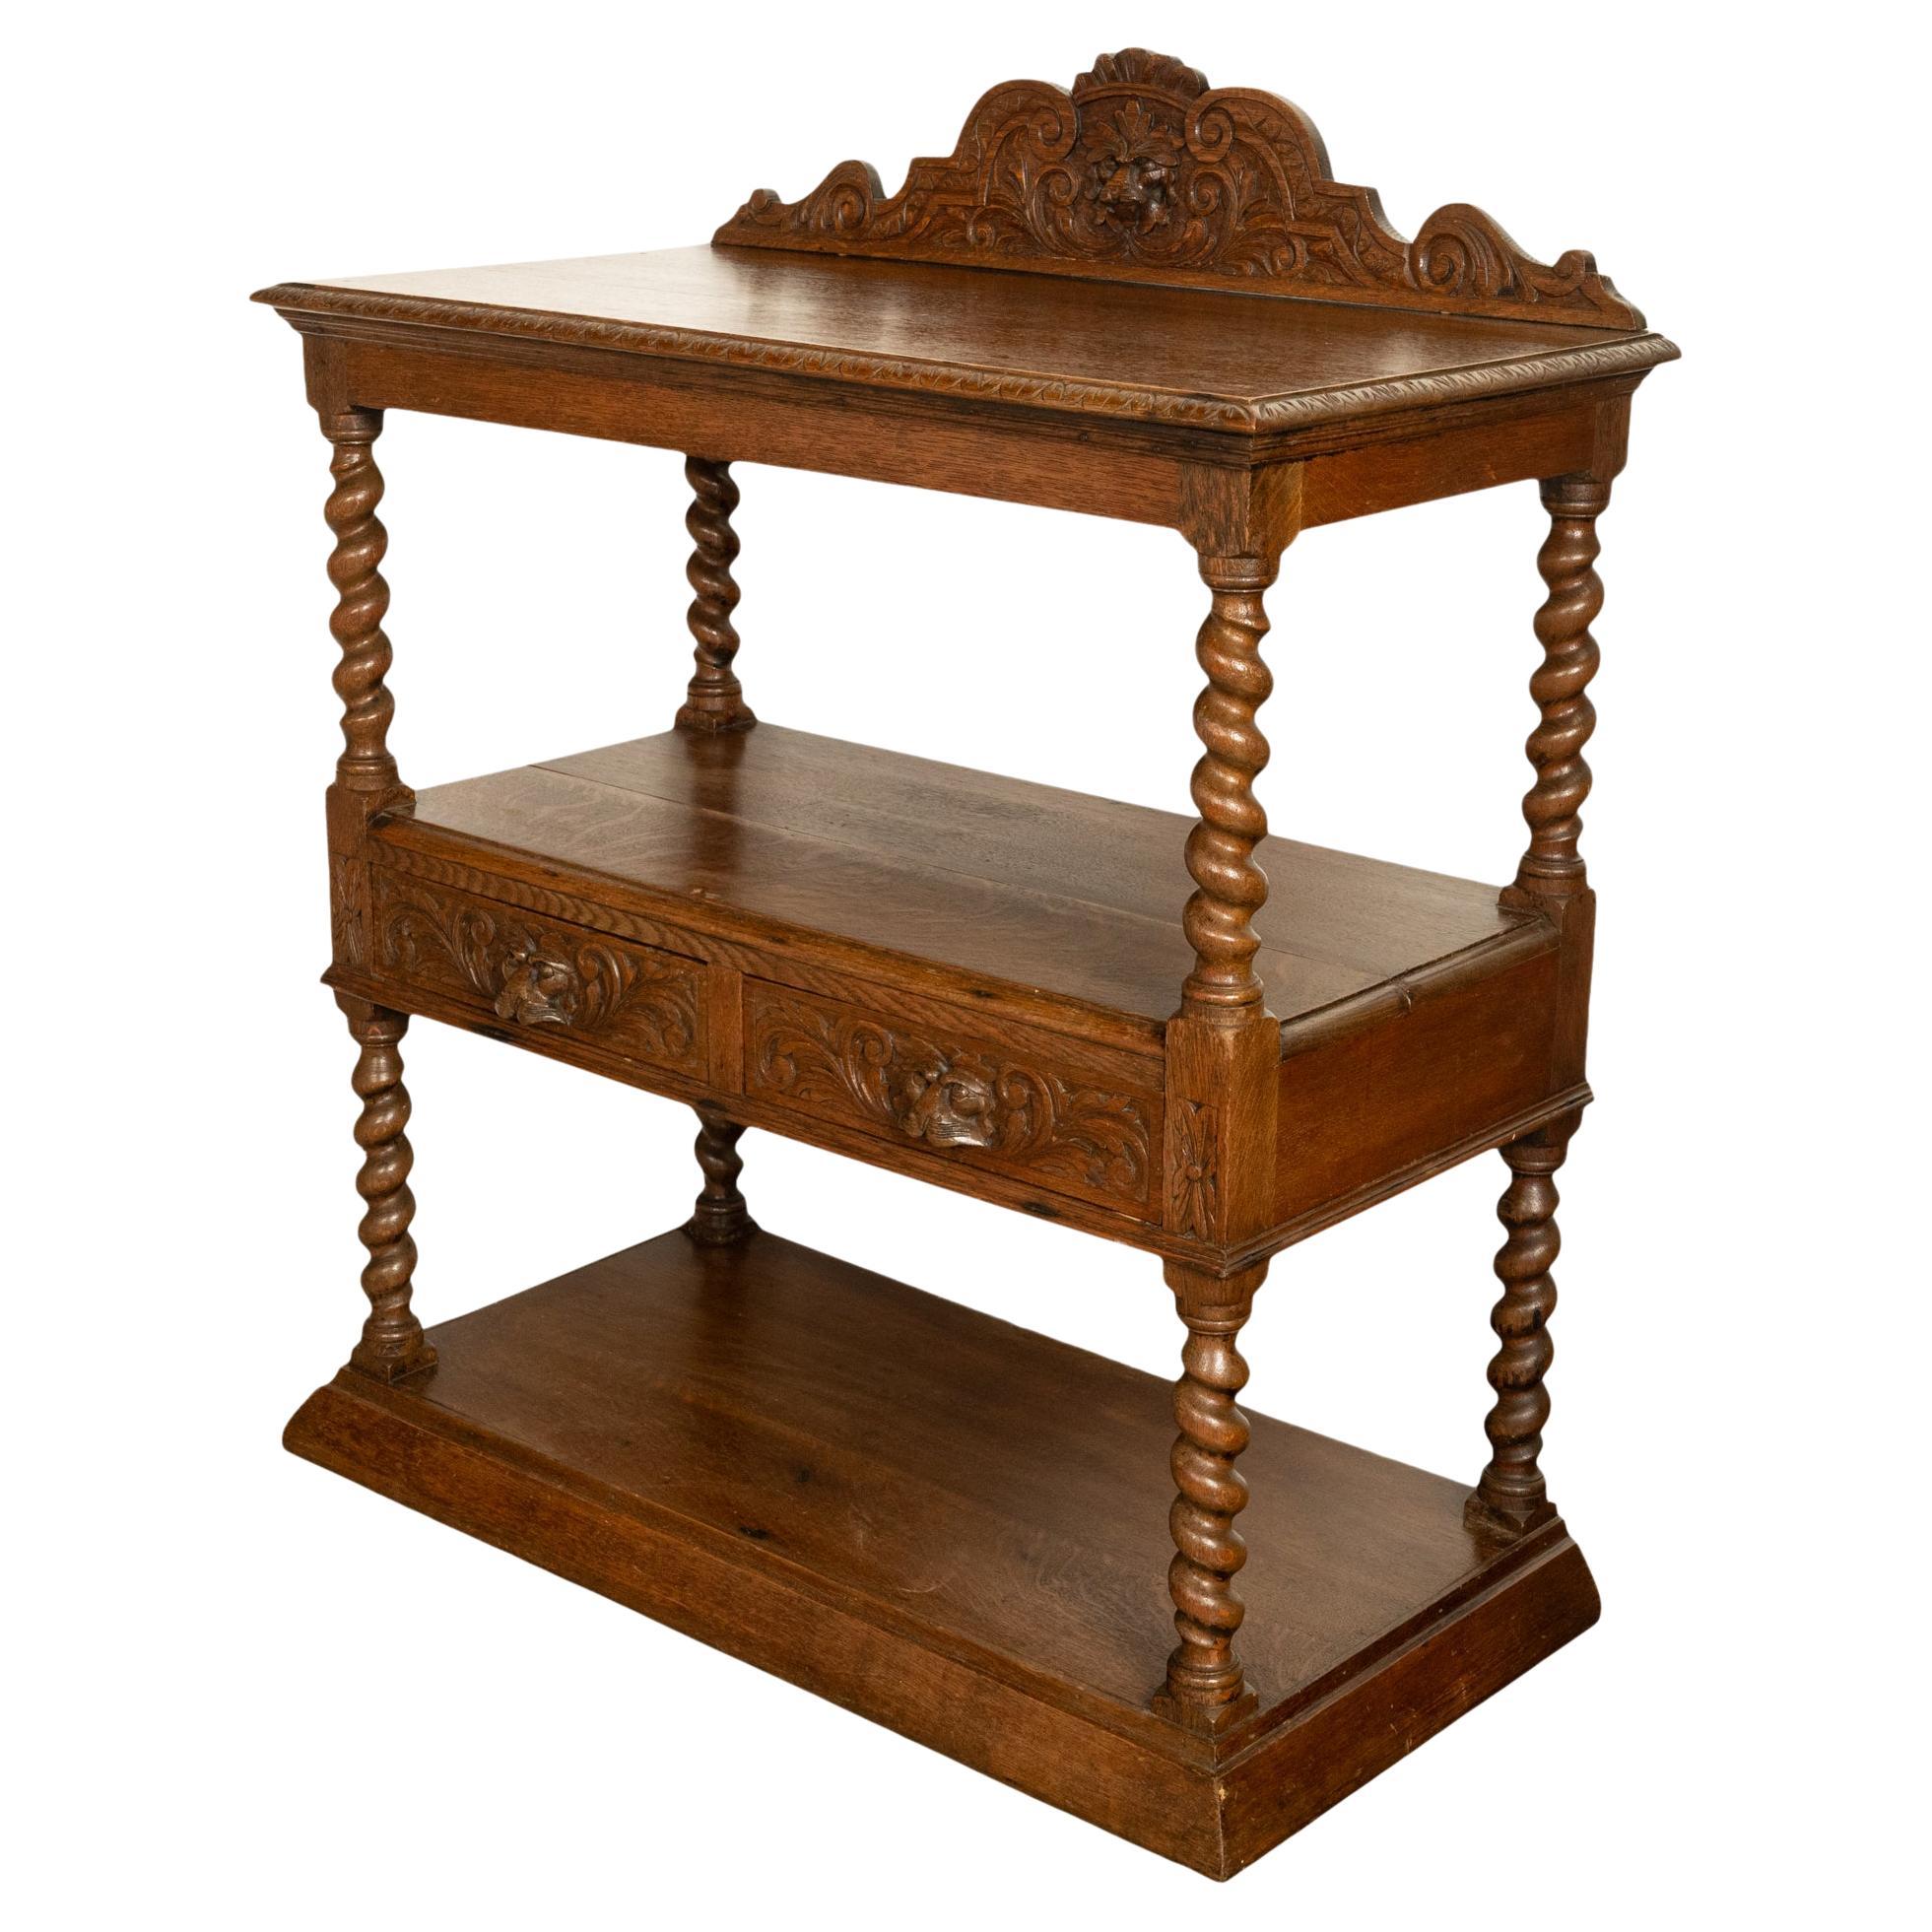 A very good antique carved oak French three tier buffet/server, circa 1870.
The back having a gallery carved with foliate & a lion's head crest, the top edge of the server carved with an a 'egg & dart' border. The three tiers are supported with